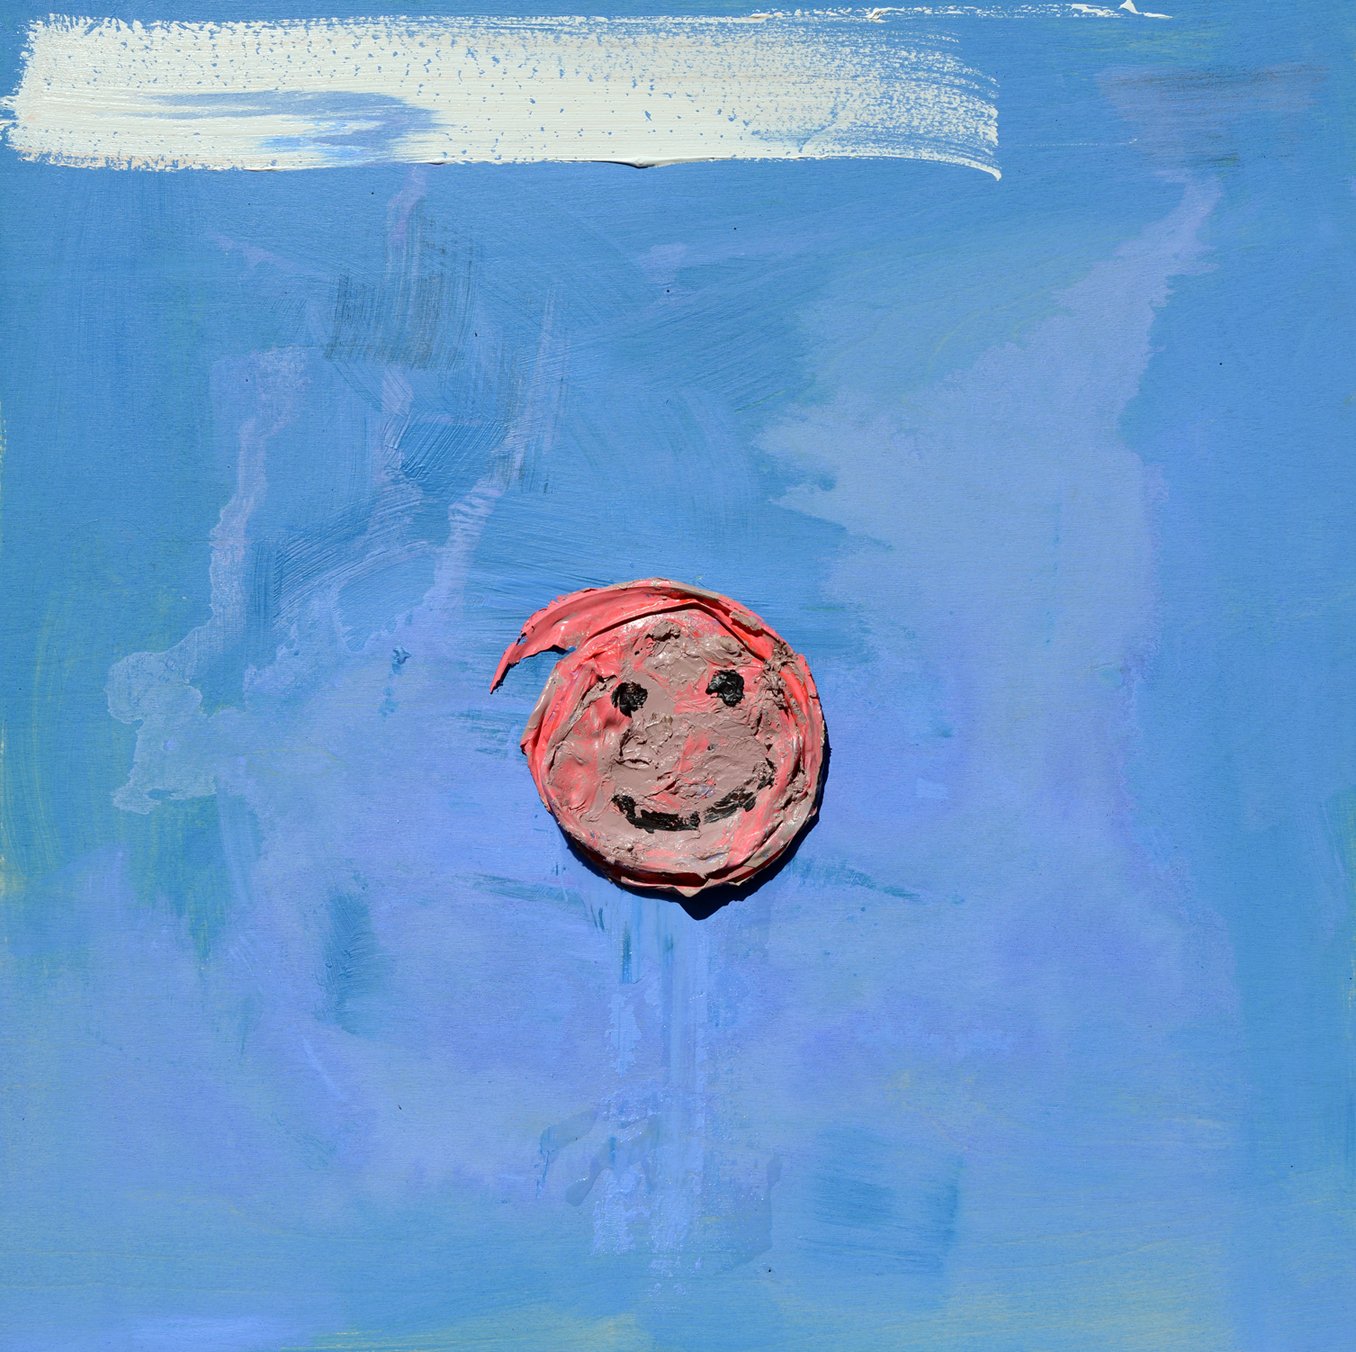 Iron Men Smily Face 2012 Acrylic on Panel 30 by 30 inches.jpg